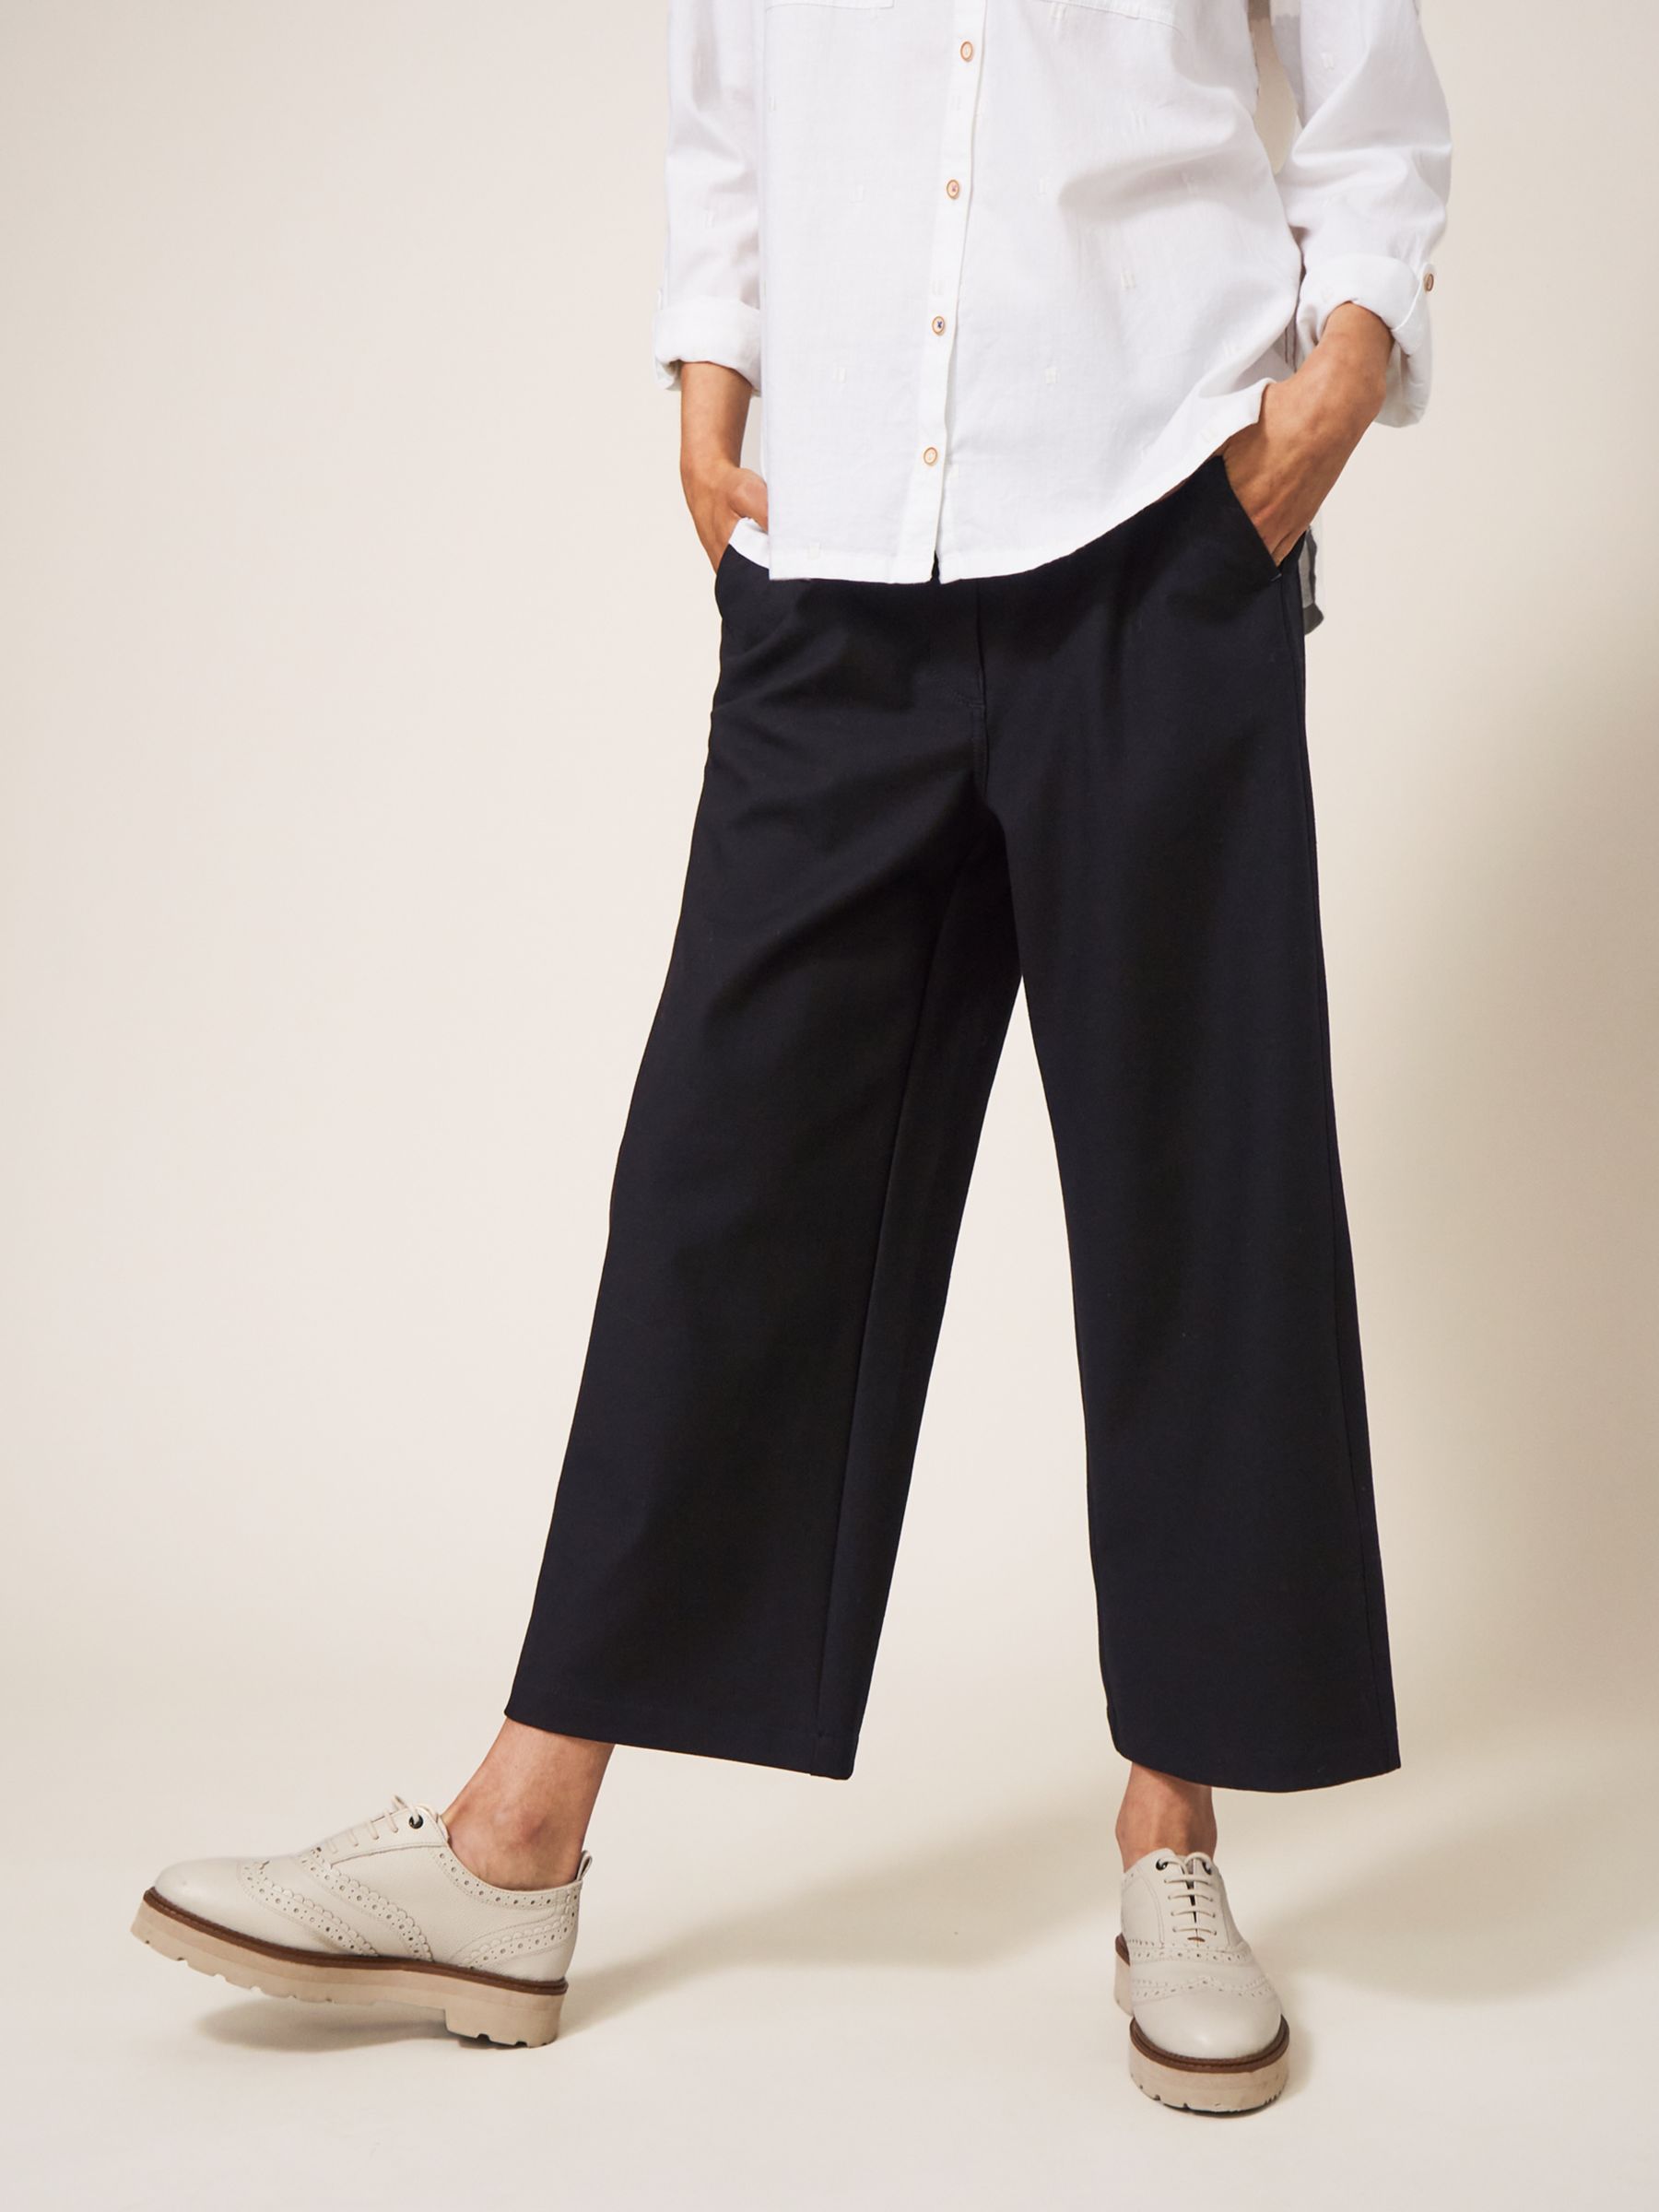 White Stuff Belle Wide Leg Cropped Trousers, Pure Black, 6